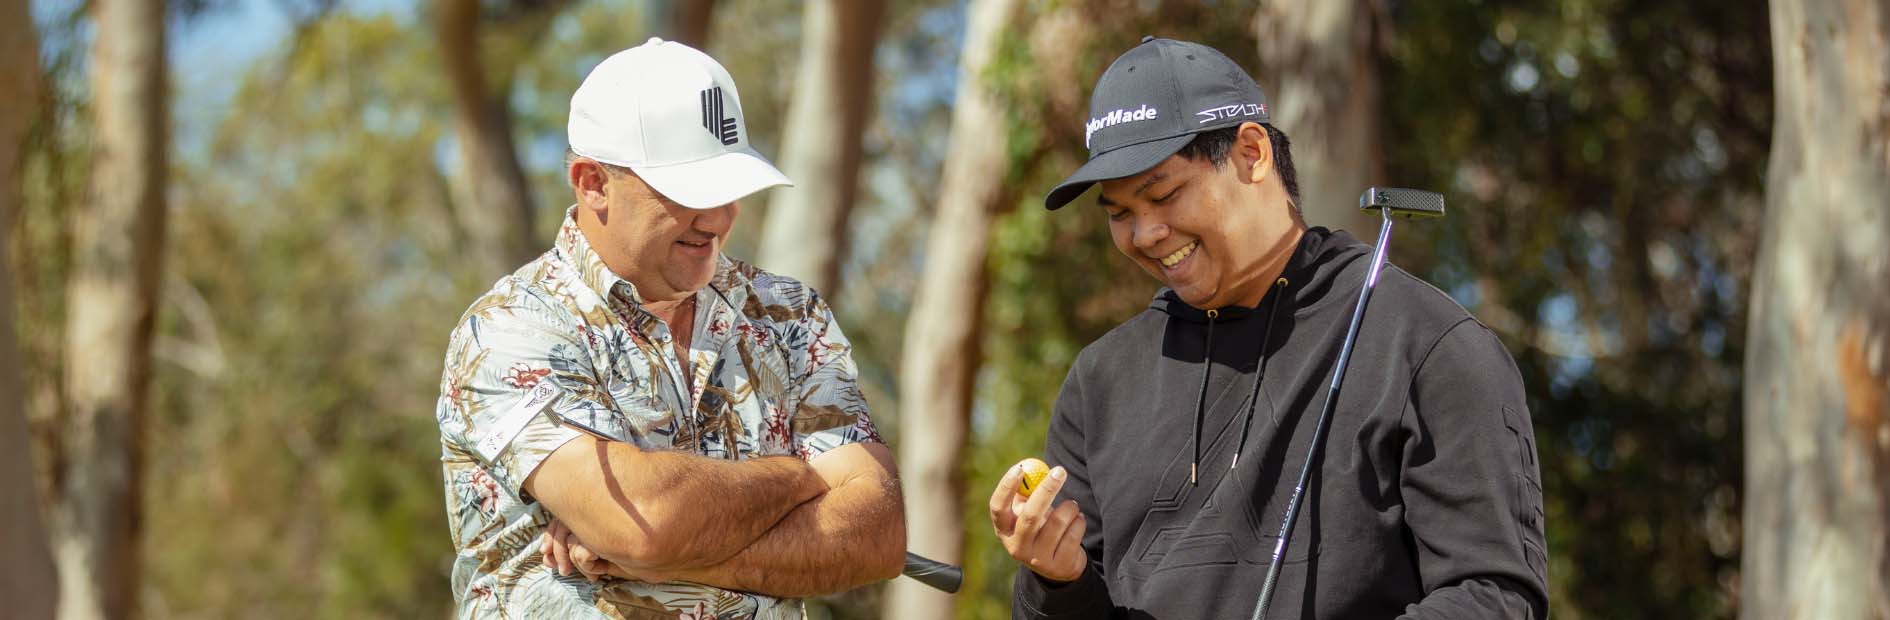 Two smiling men dressed in polo shirts and caps hold golf clubs and inspect a yellow golf ball